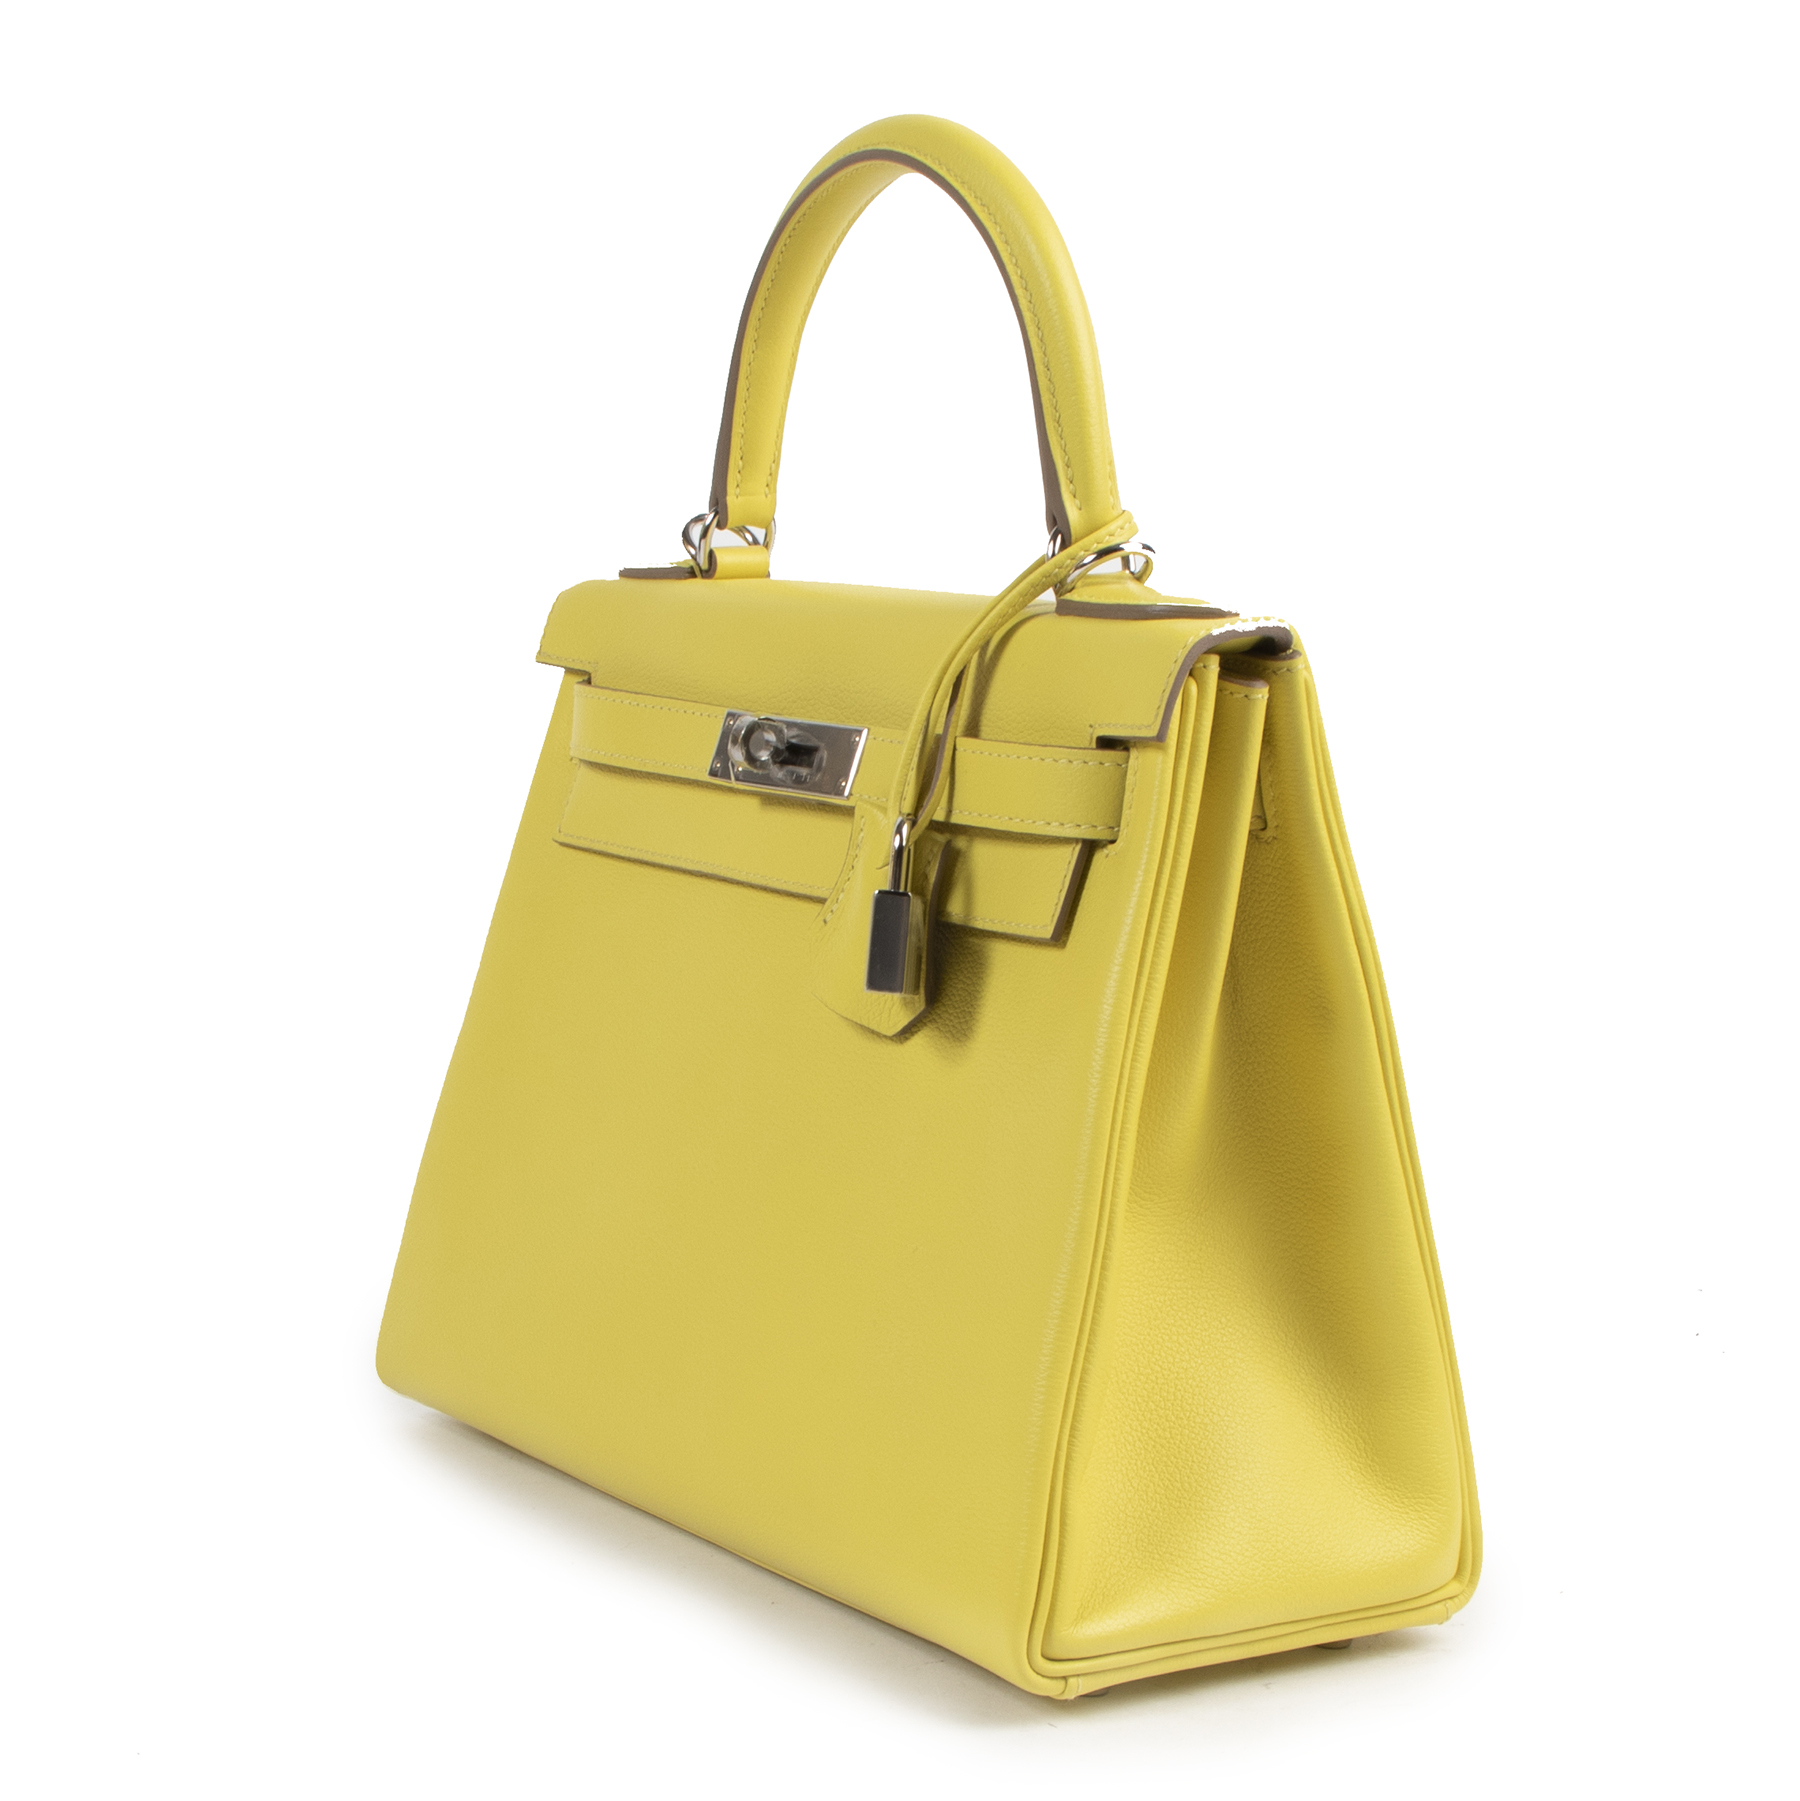 LABELLOV - Make heads turn with this stunning Hermes Kelly 28